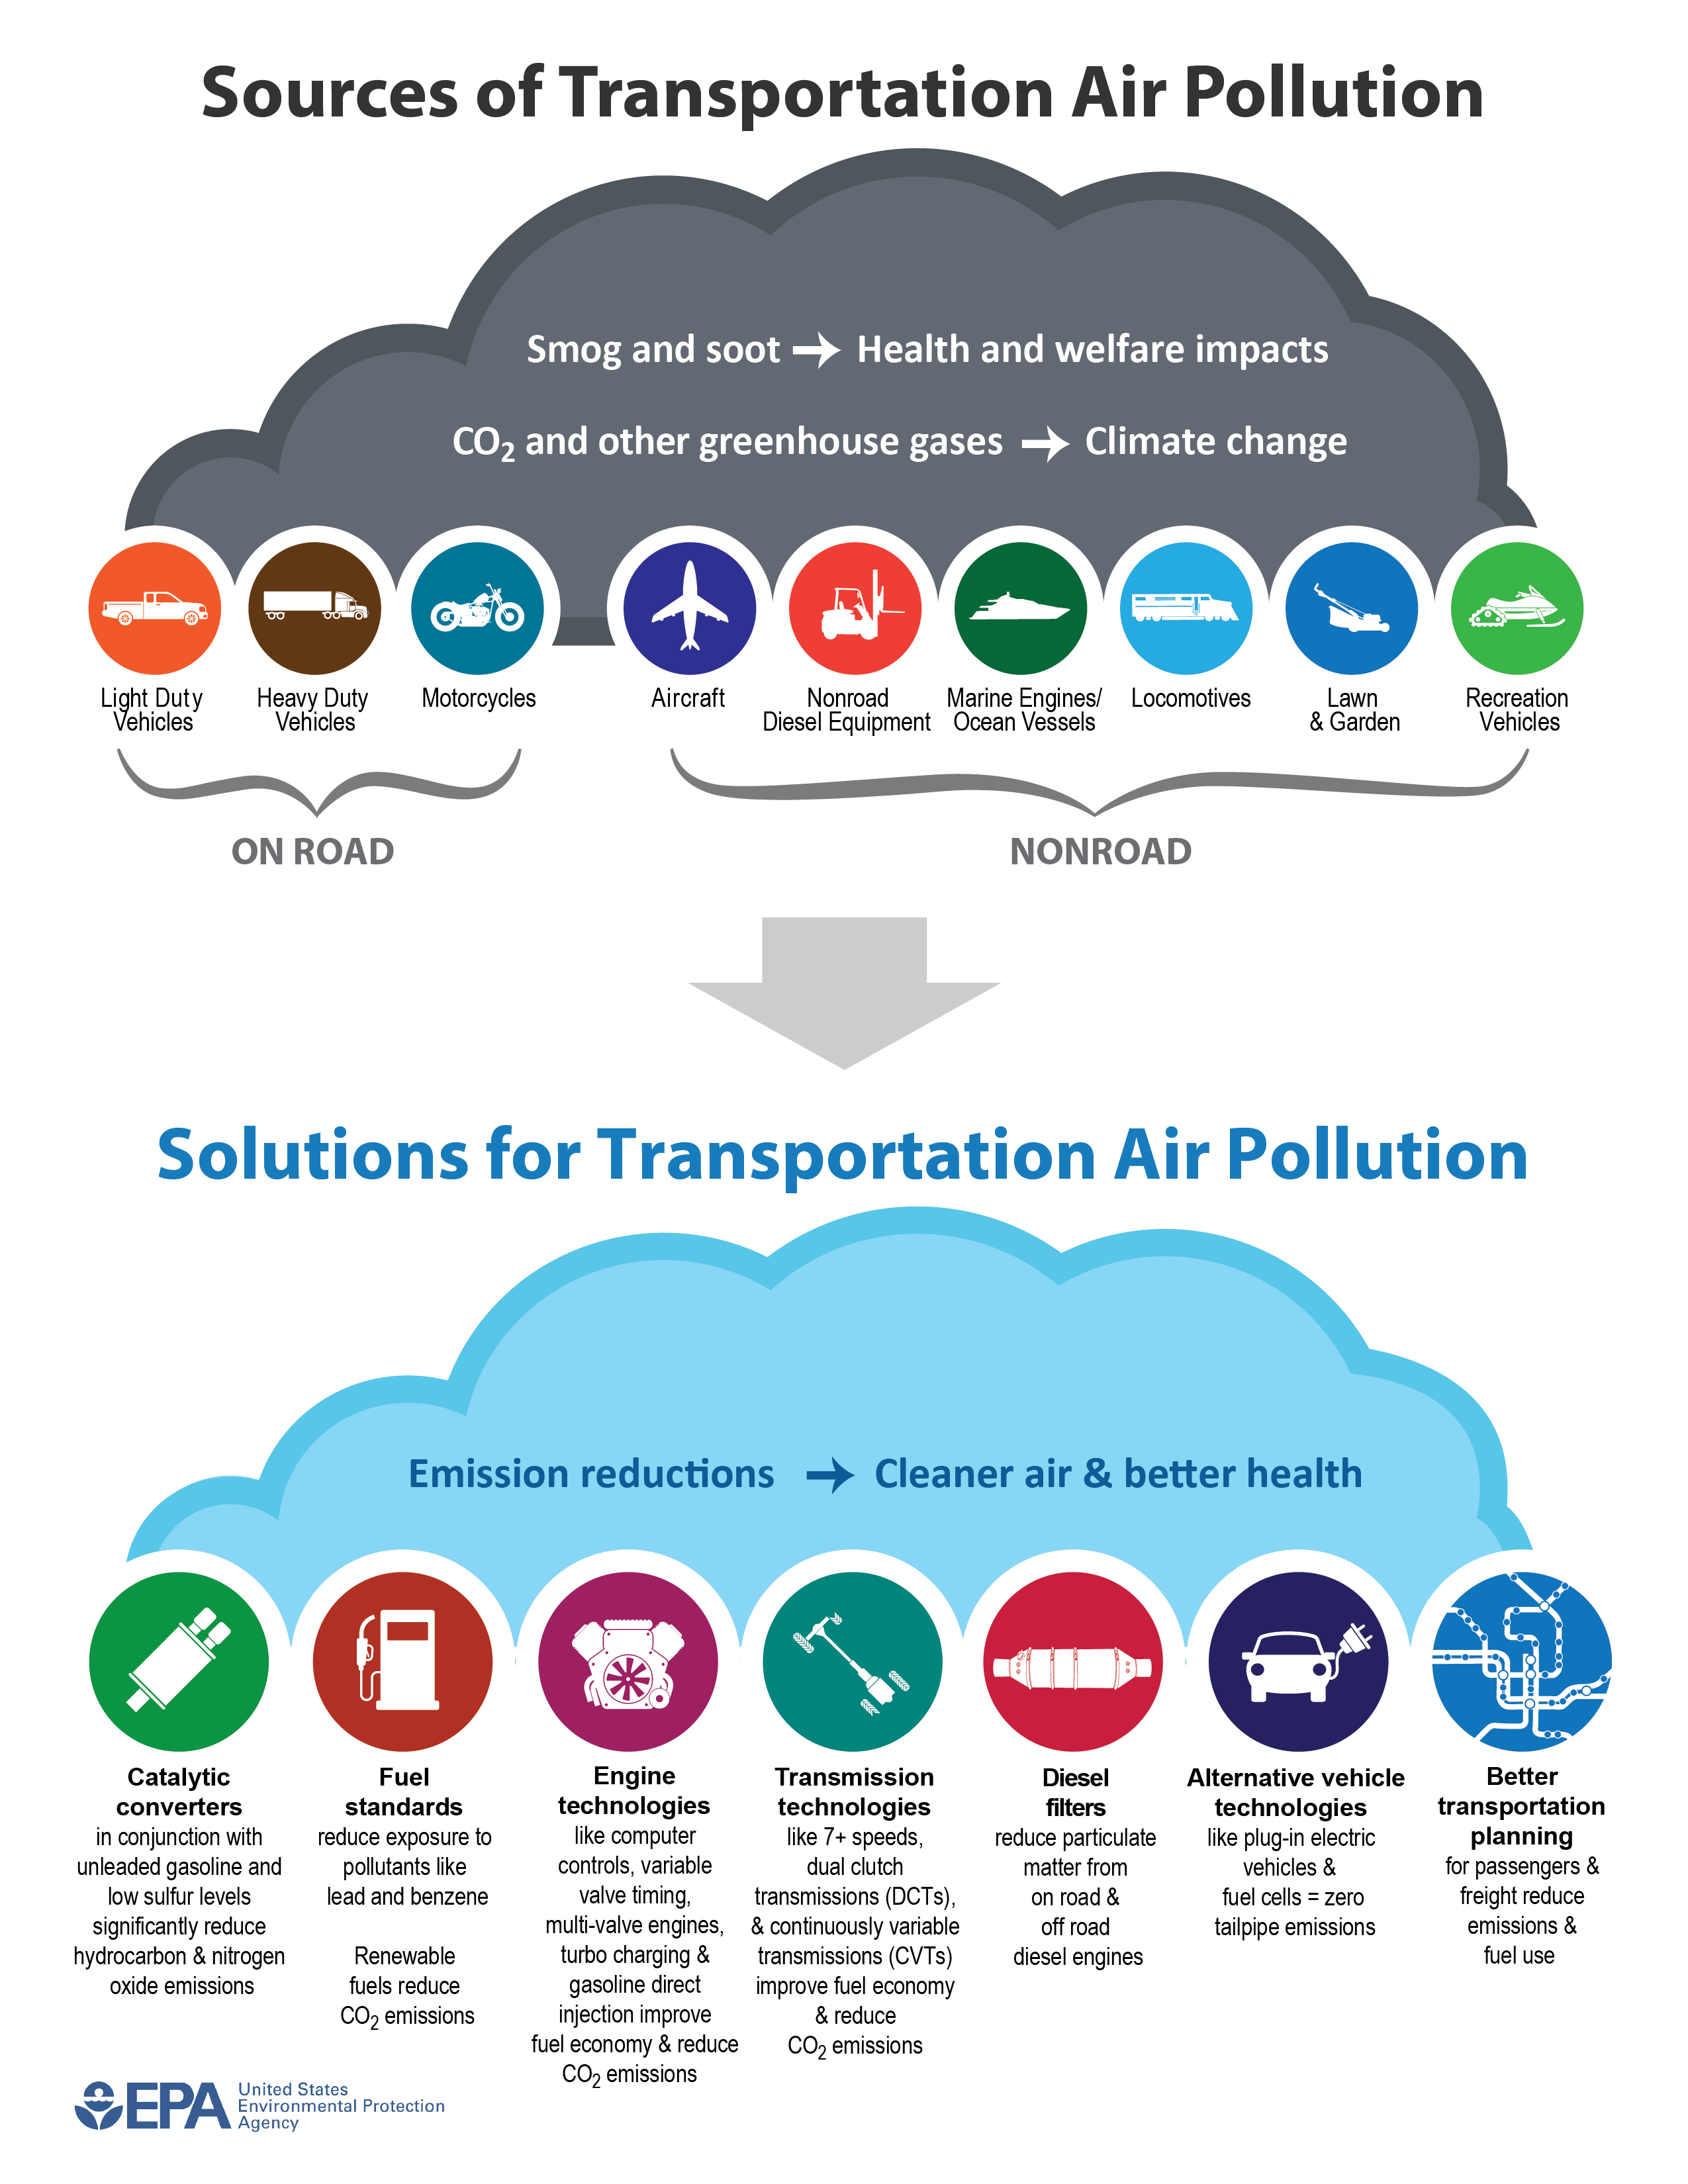 Sources of air pollution cause: PM = soot = lung problems; CO2 = greenhouse gas = climate change; CO, NOx, SOx, & VOC = smog = asthma and poor air quality/visibility. Solutions provide emission reductions that equal human and environmental health gains.